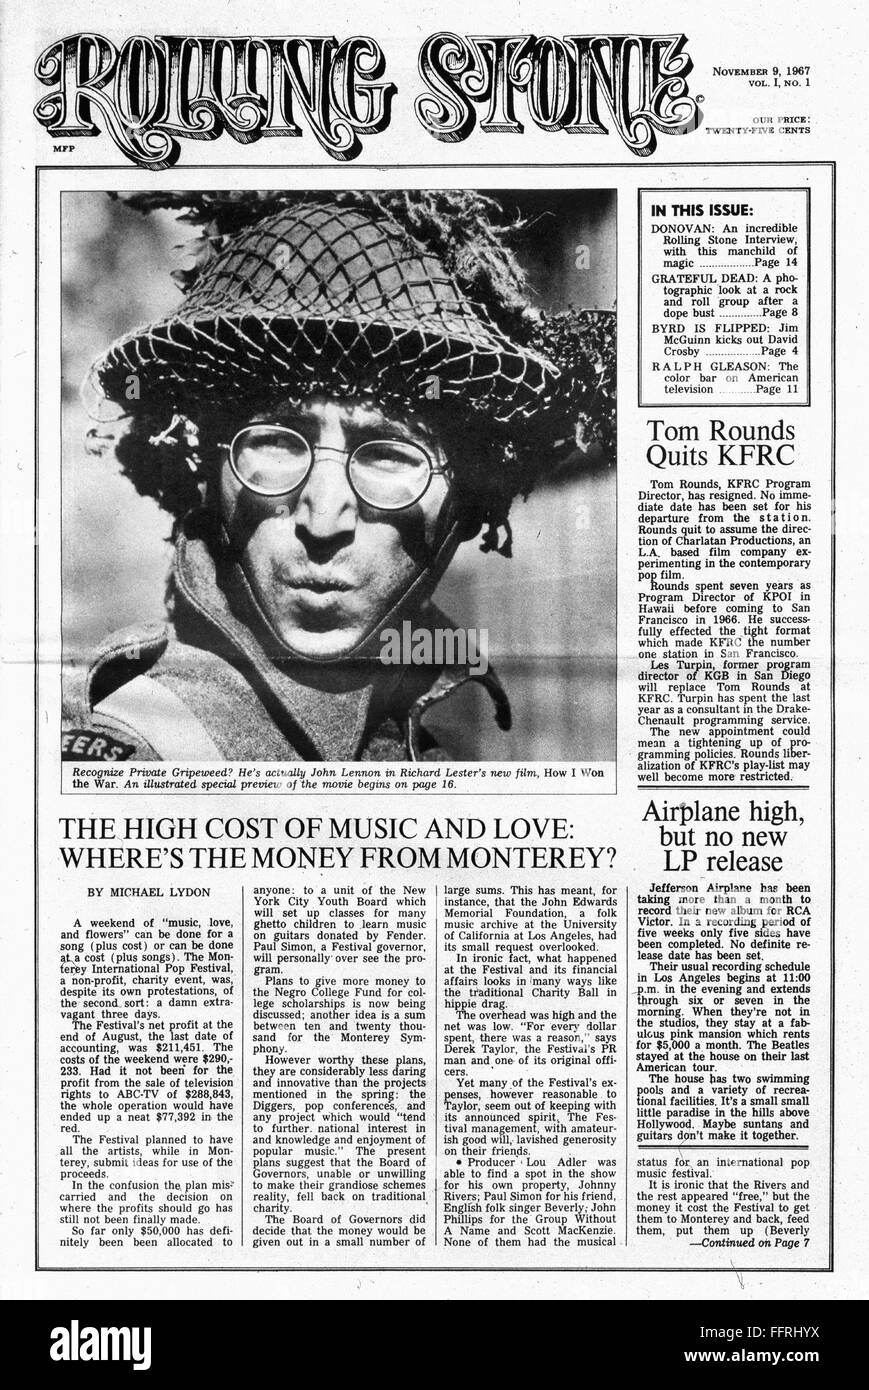 ROLLING STONE, 1967. /nFront page of the first issue of 'Rolling Stone'  magazine, 9 November 1967, featuring a photograph of rock musician John  Lennon of the Beatles as he appeared while playing